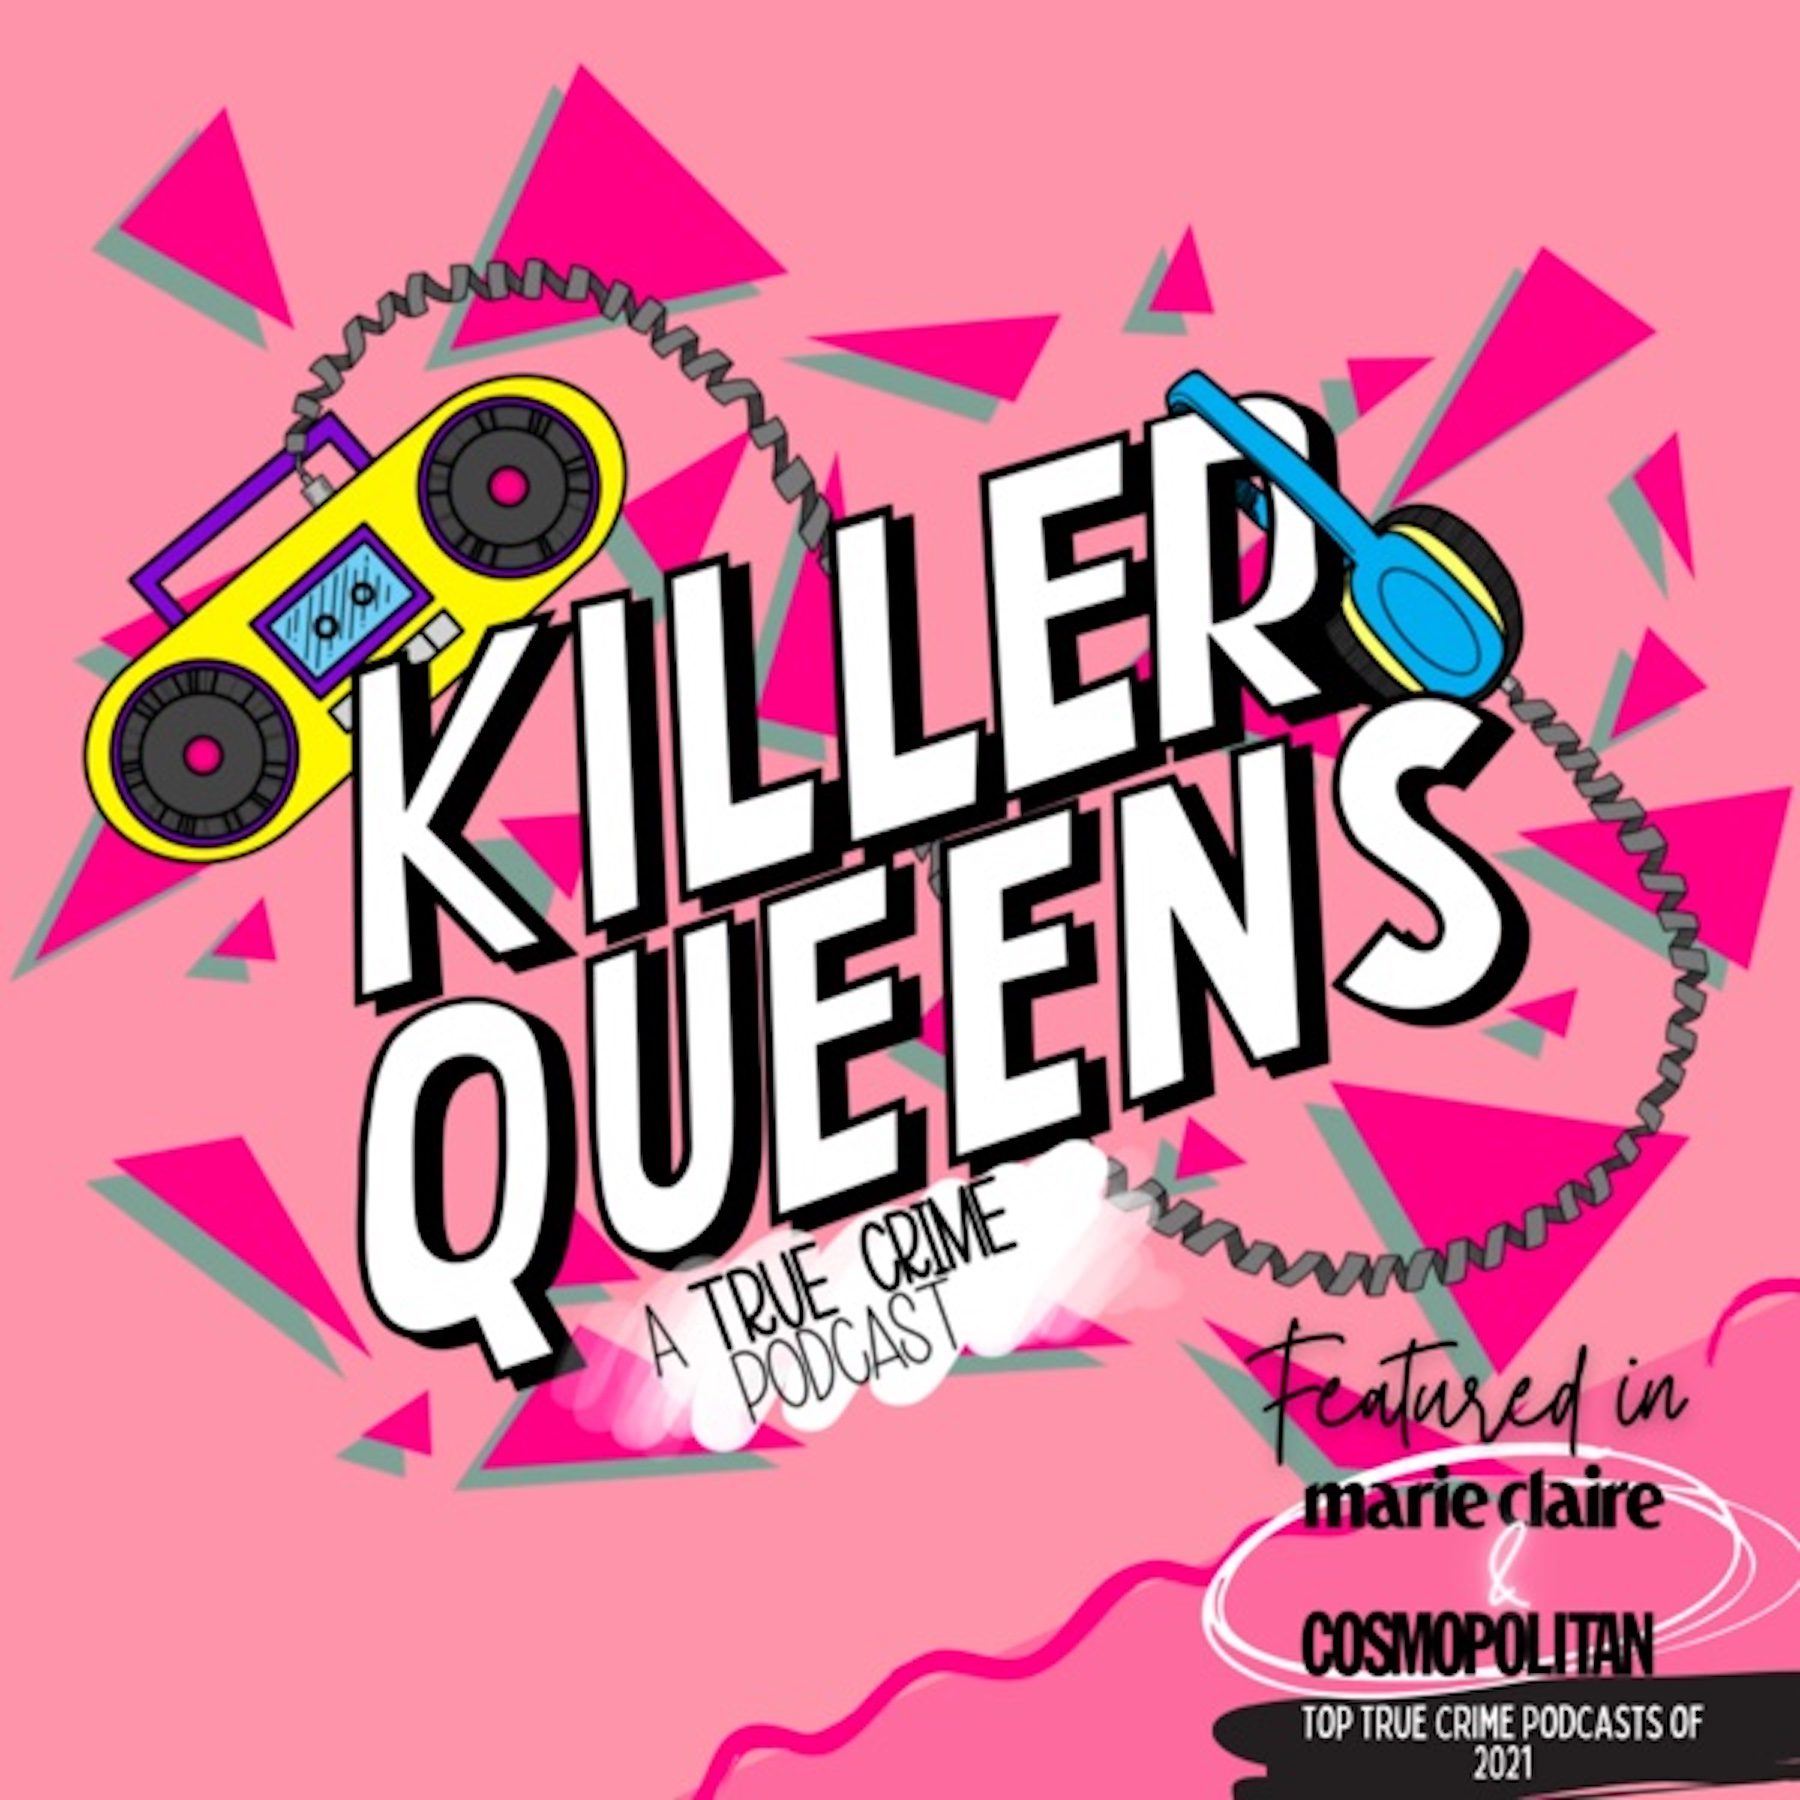 Killer Queens logo, 80s style pink abstract shapes and a yellow boombox.